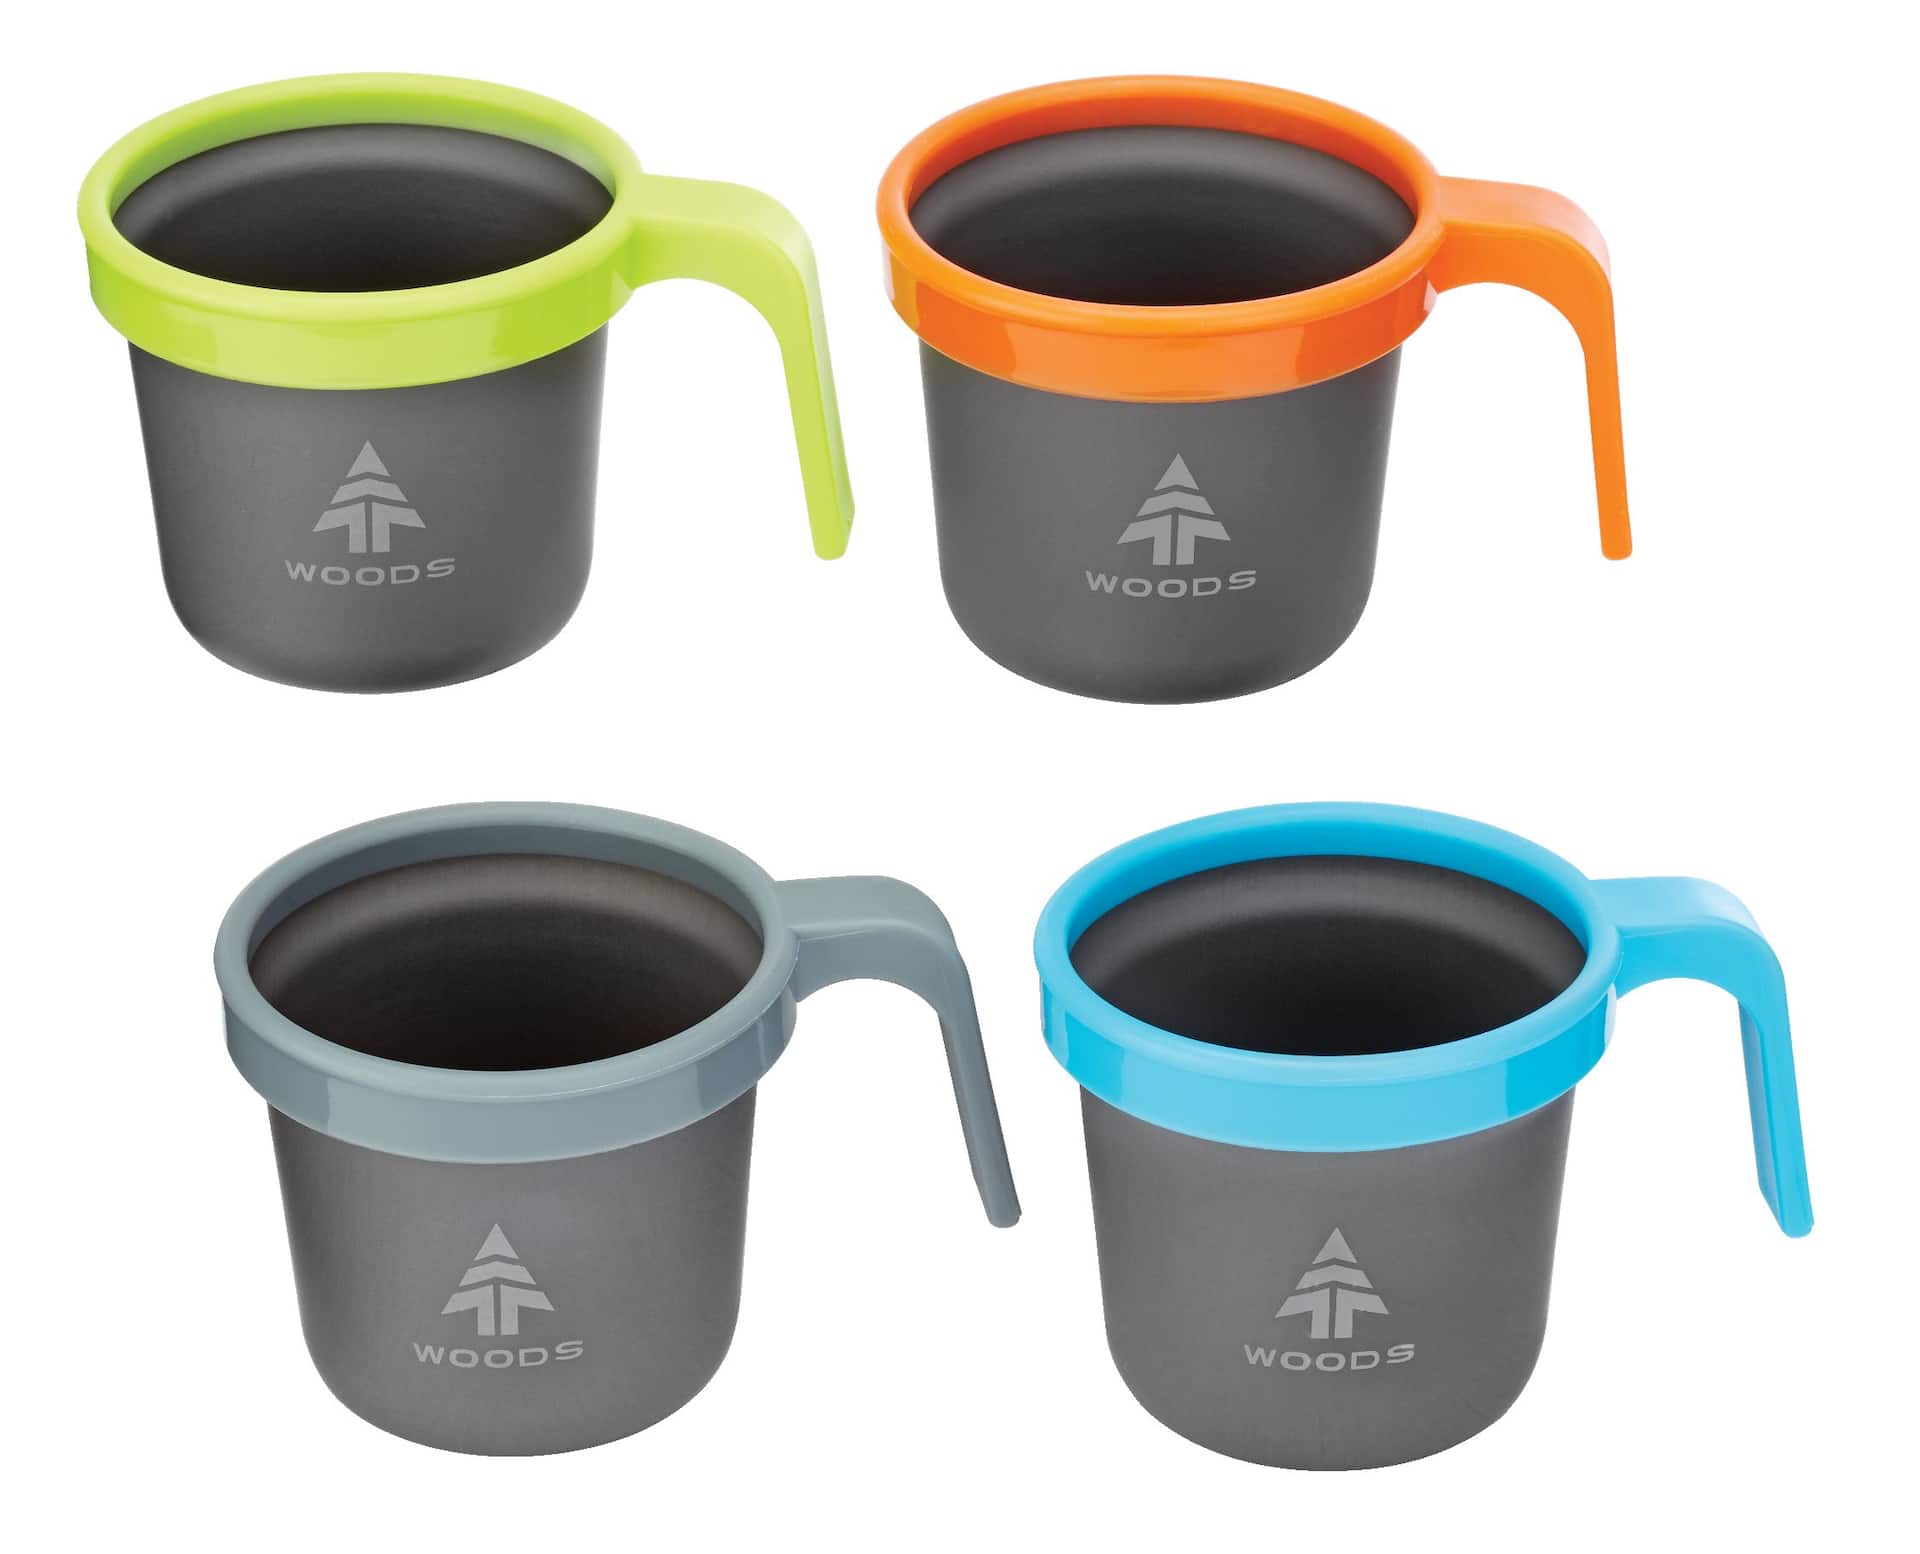 https://media-www.canadiantire.ca/product/playing/camping/camping-living/0766082/woods-kitimat-nested-coffee-mugs-4-pack-5c11cec1-418b-4233-94b0-bc91c09c4826-jpgrendition.jpg